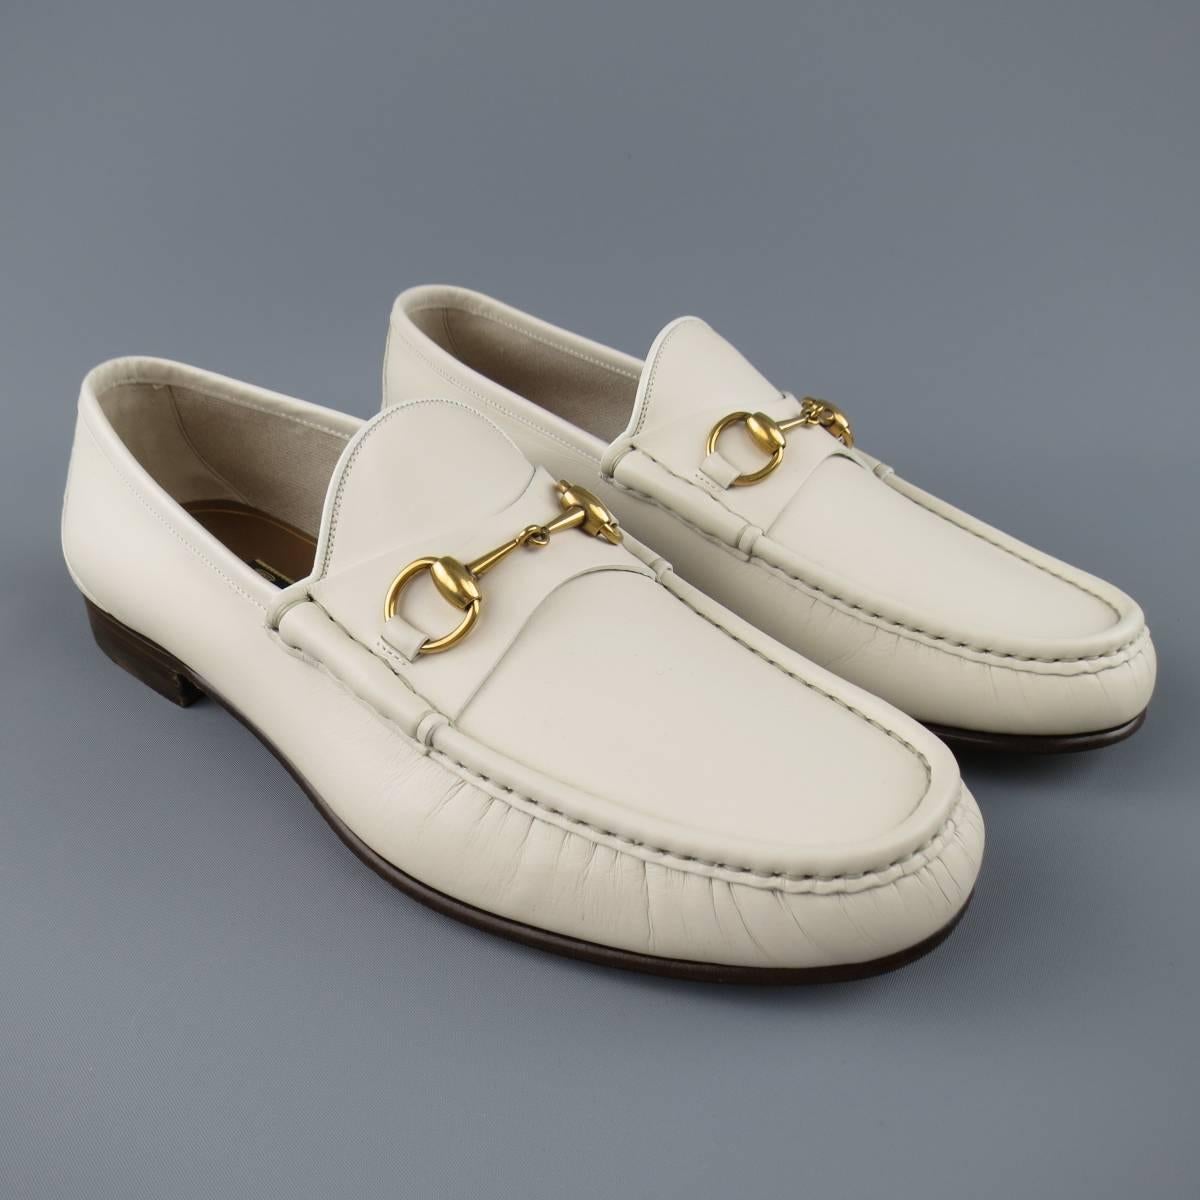 Classic GUCCI loafers in a light off white creamy beige matte leather with  yellow gold tone horsbit. With Box. Made in Italy. 
 
New with Box. Retails at $790.00.
Marked: 10.5